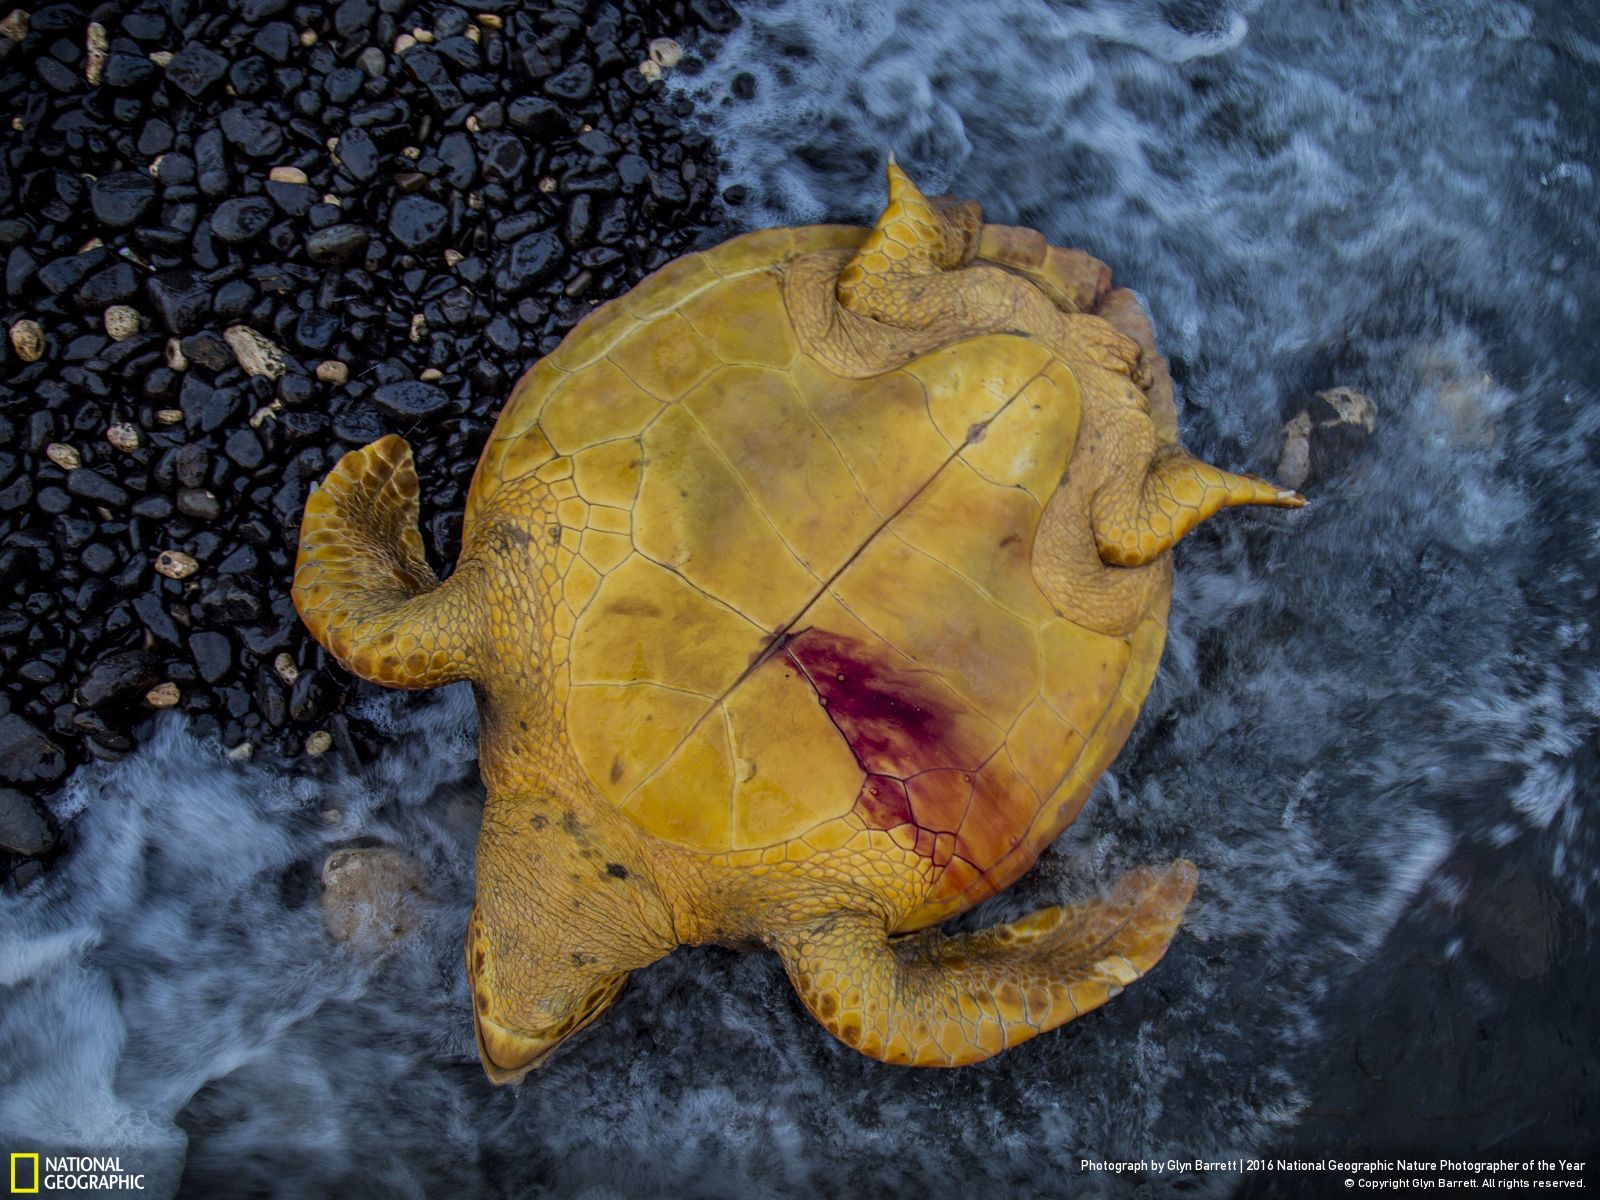 Turtle killed and discarded by the shore